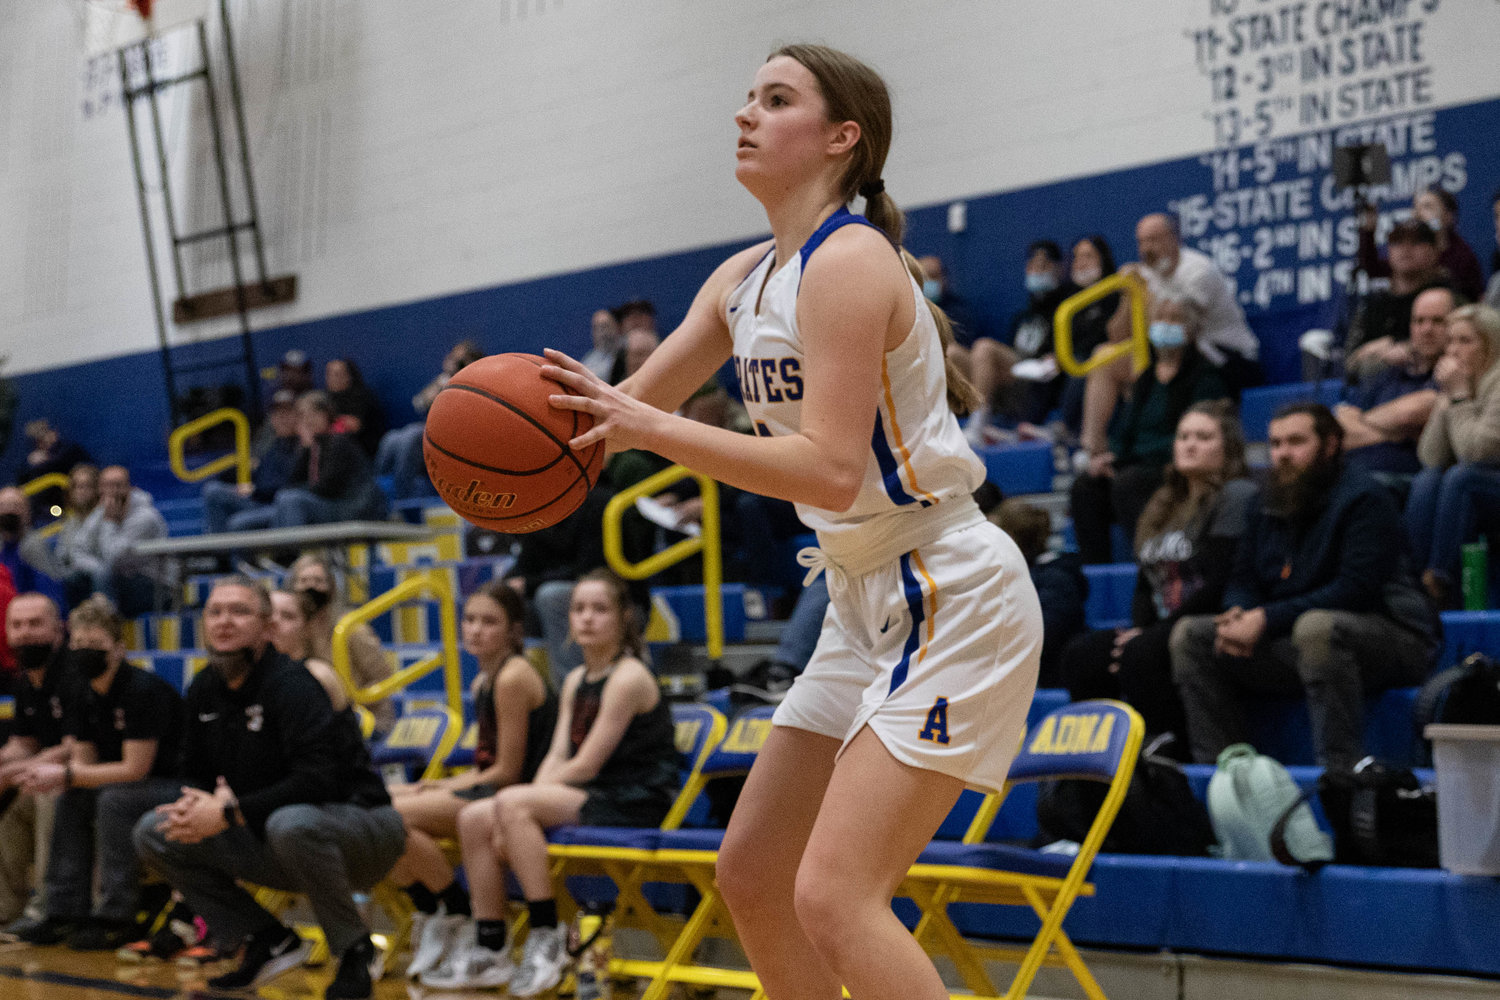 Adna guard Brooklyn Loose lines up a shot from outside against Napavine Jan. 28.